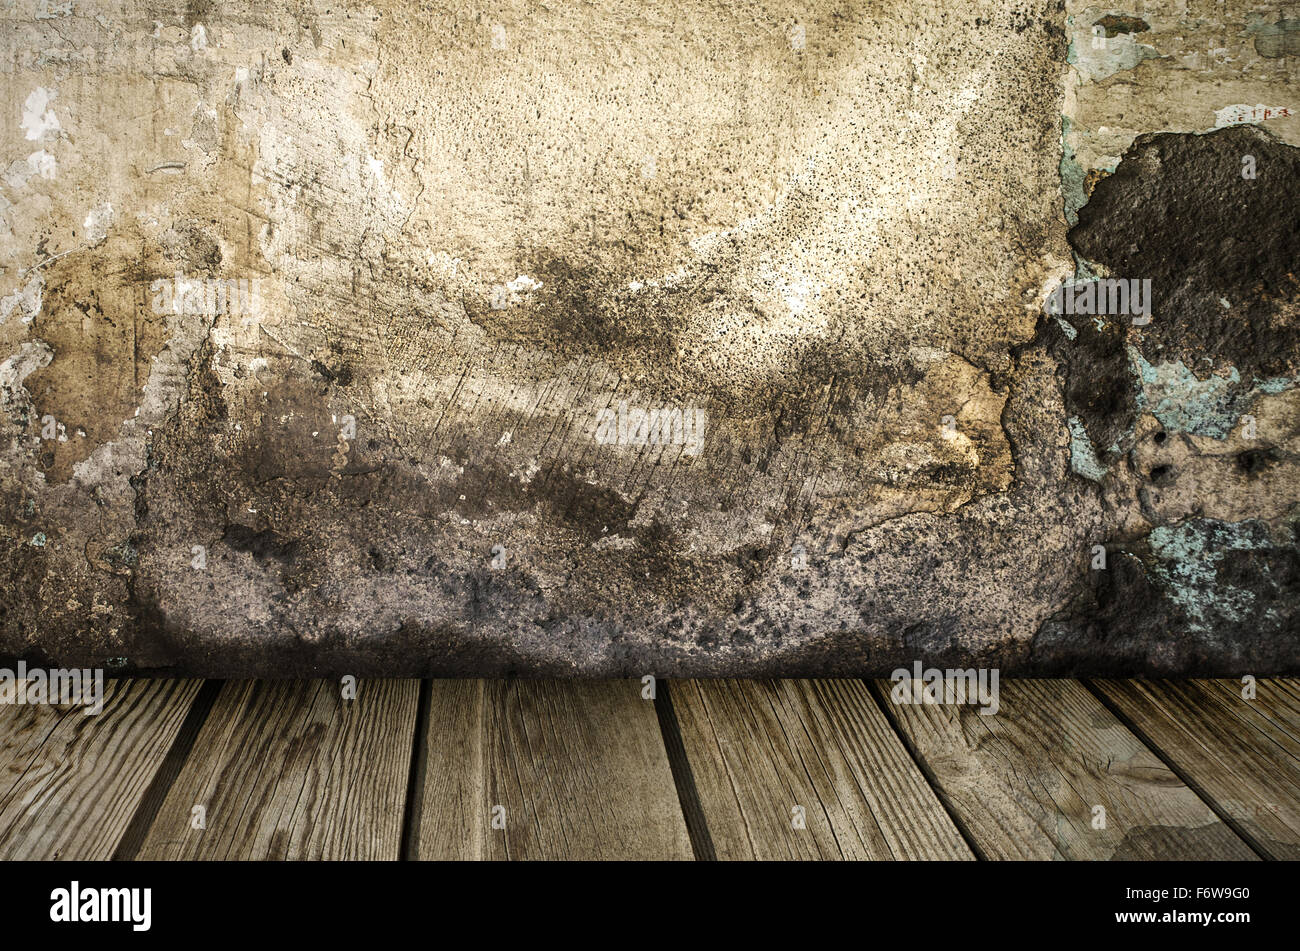 Grunge wall with wooden plank floor Stock Photo